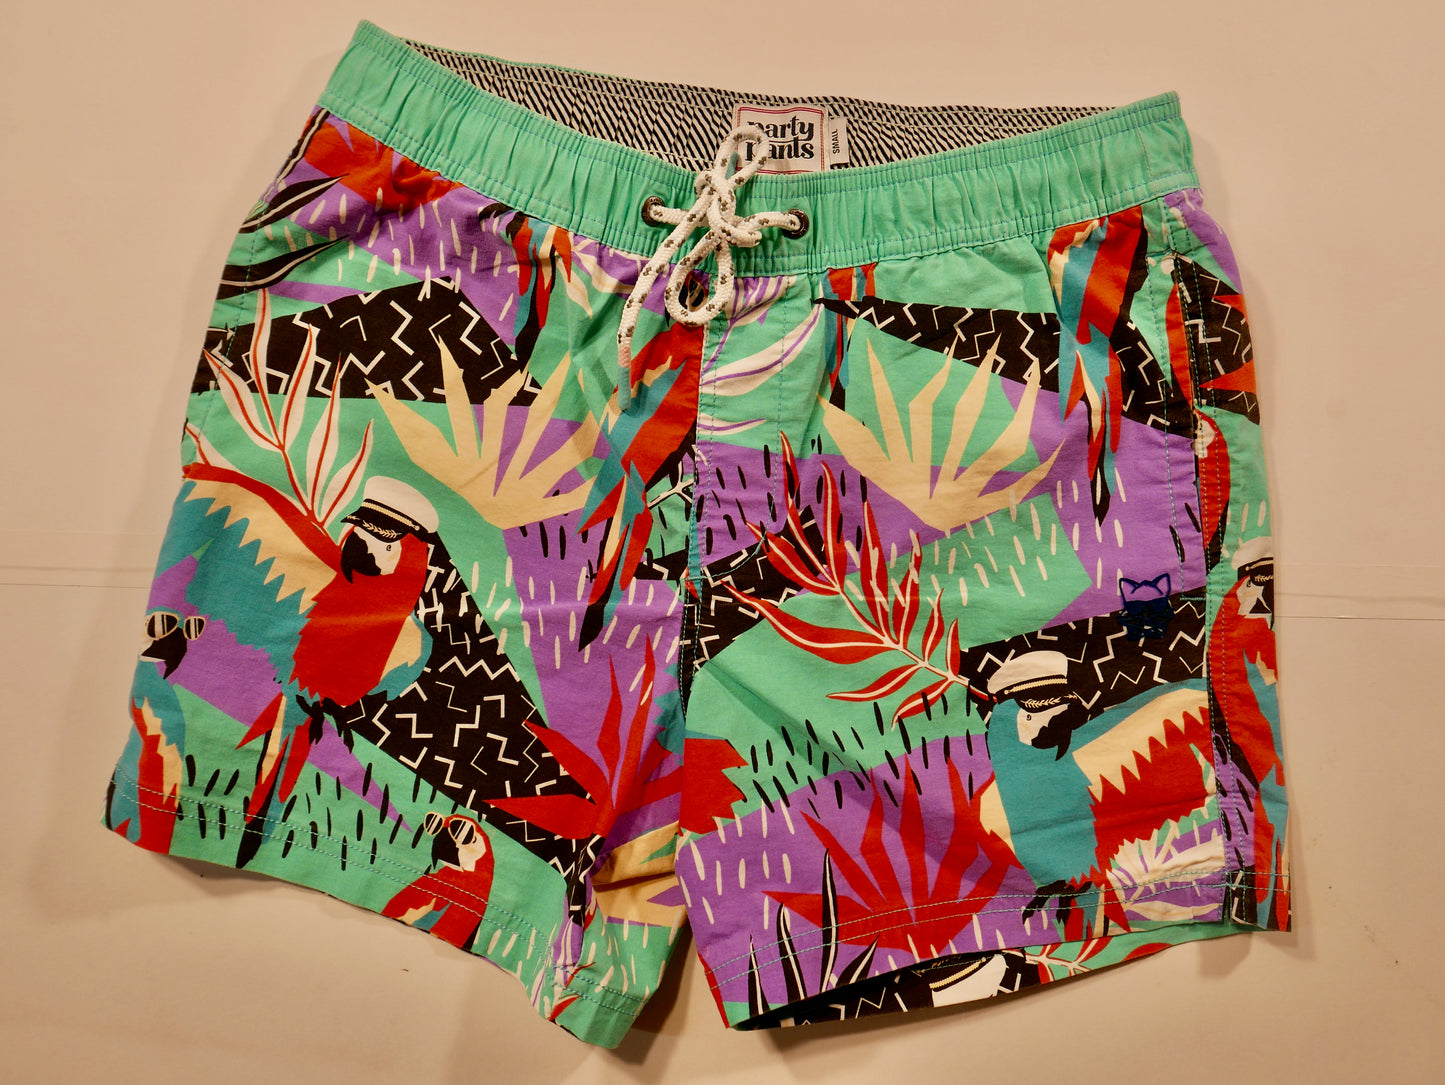 Party Pants Captain Cockatoo Swim Trunks, Size Small